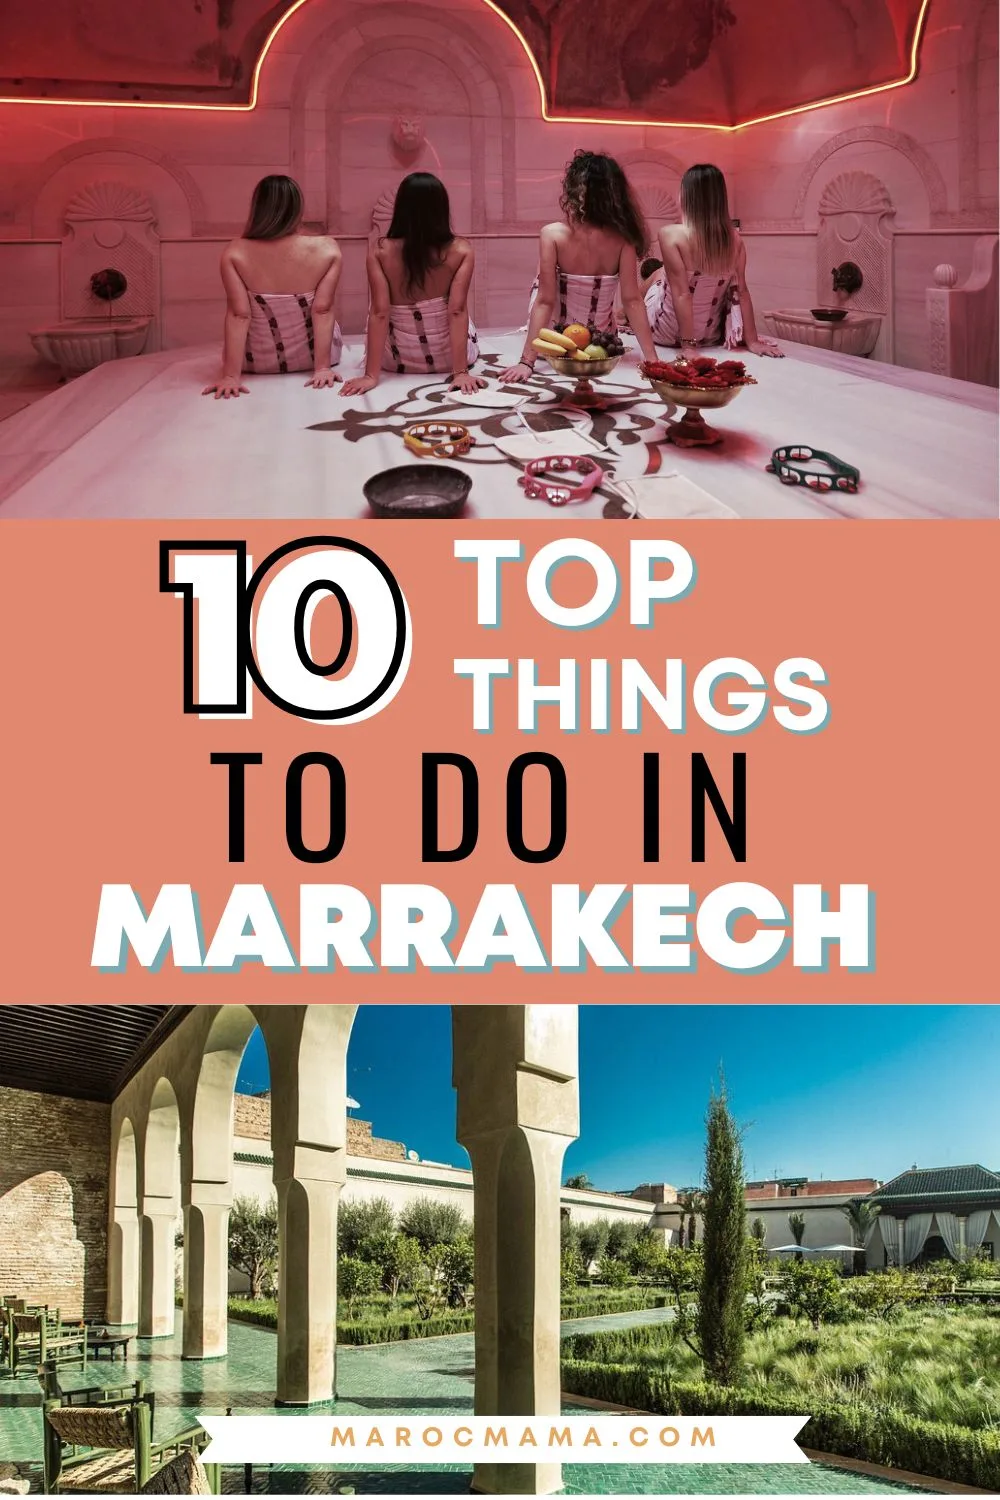 Top image, traditional hammam and bottom image is a view in Le Jardin Secret with the text Top 10 Things to Do in Marrakech